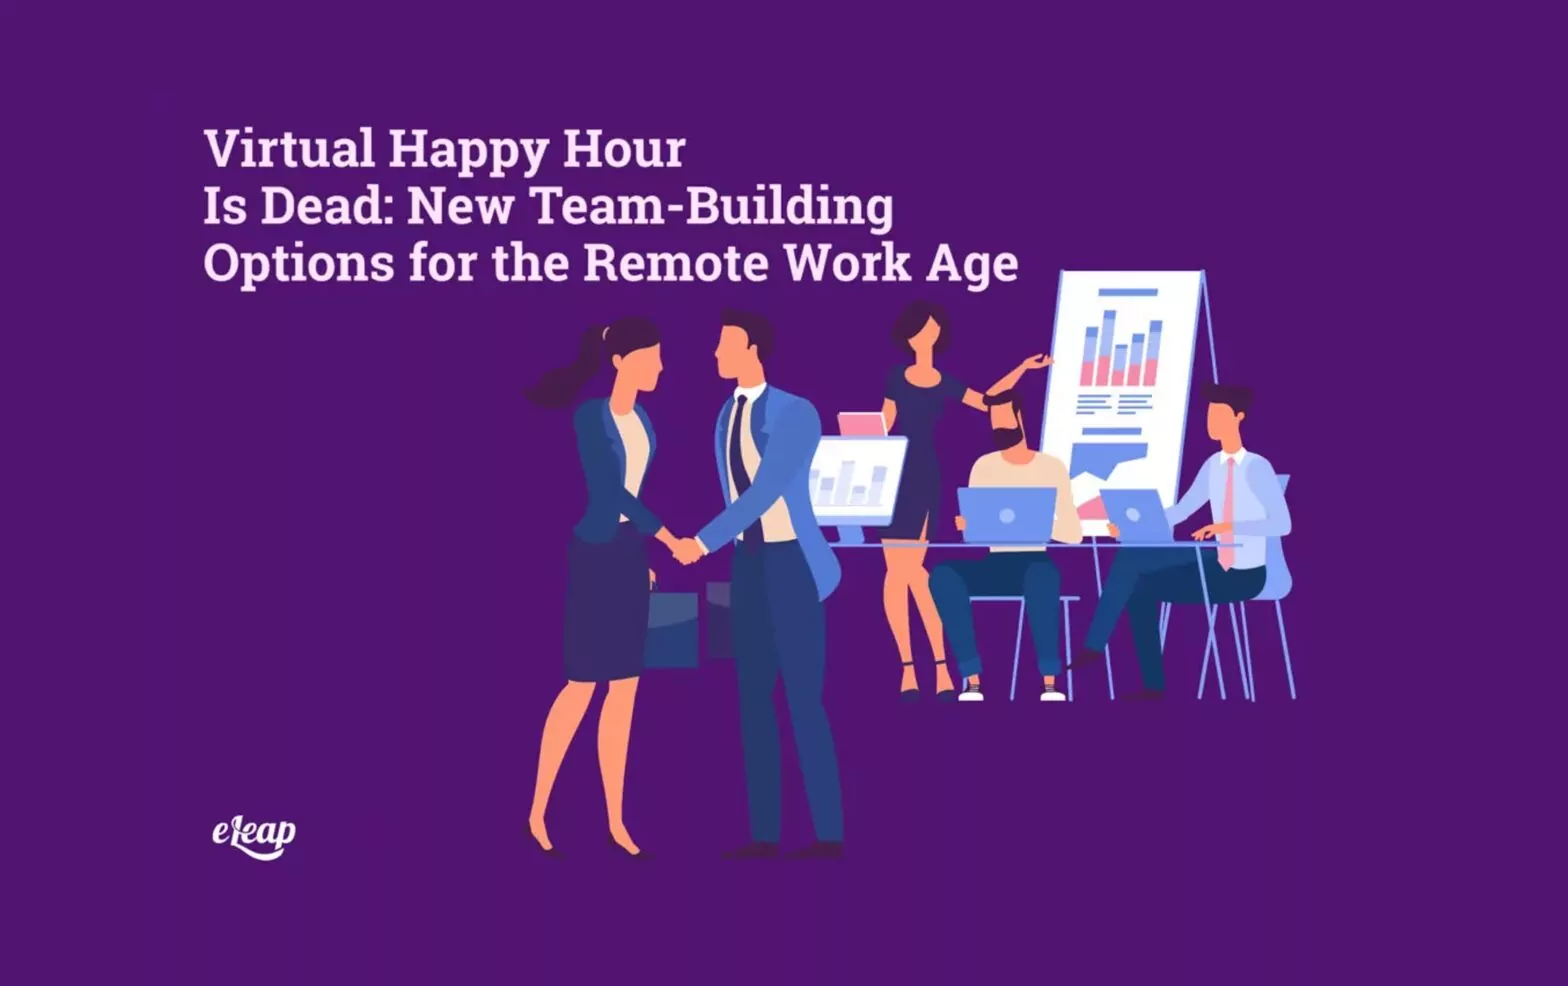 Virtual Happy Hour Is Dead: New Team-Building Options for the Remote Work Age